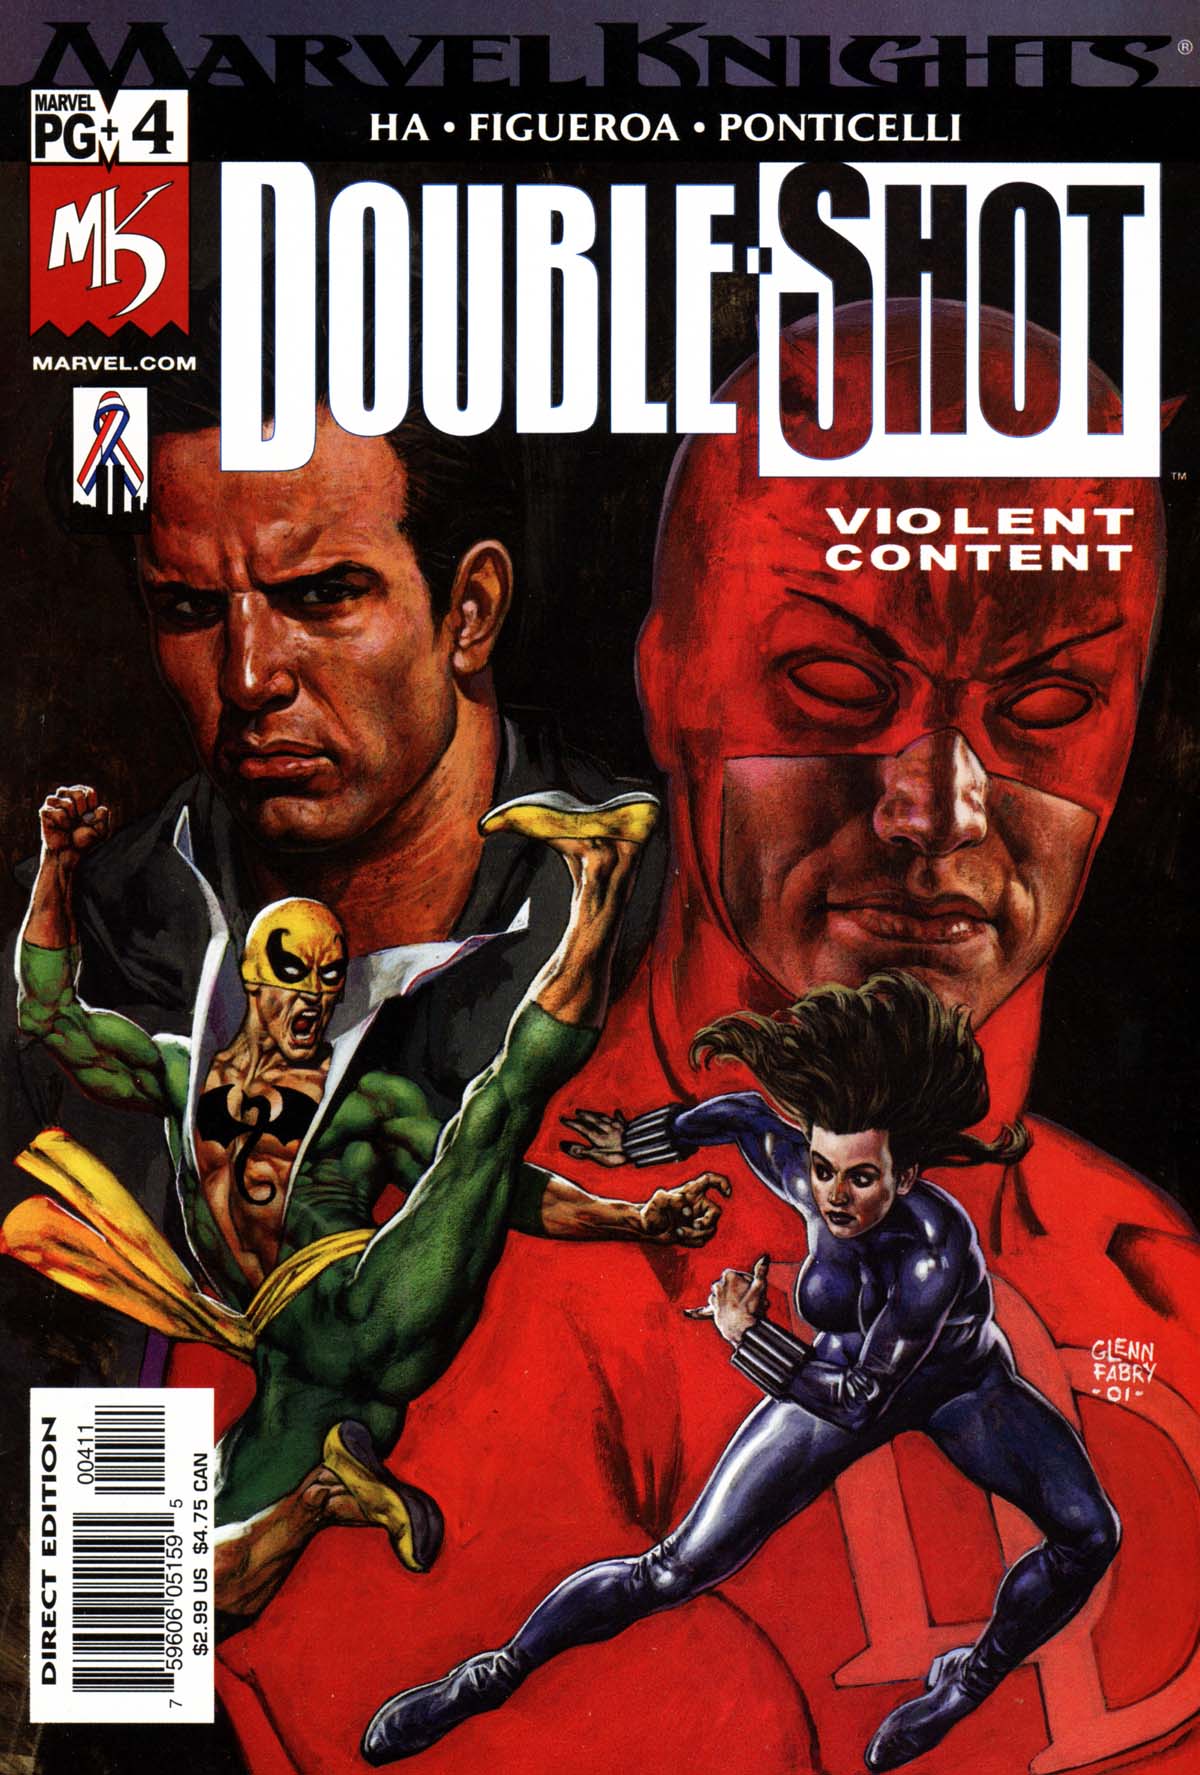 Read online Marvel Knights Double Shot comic -  Issue #4 - 1